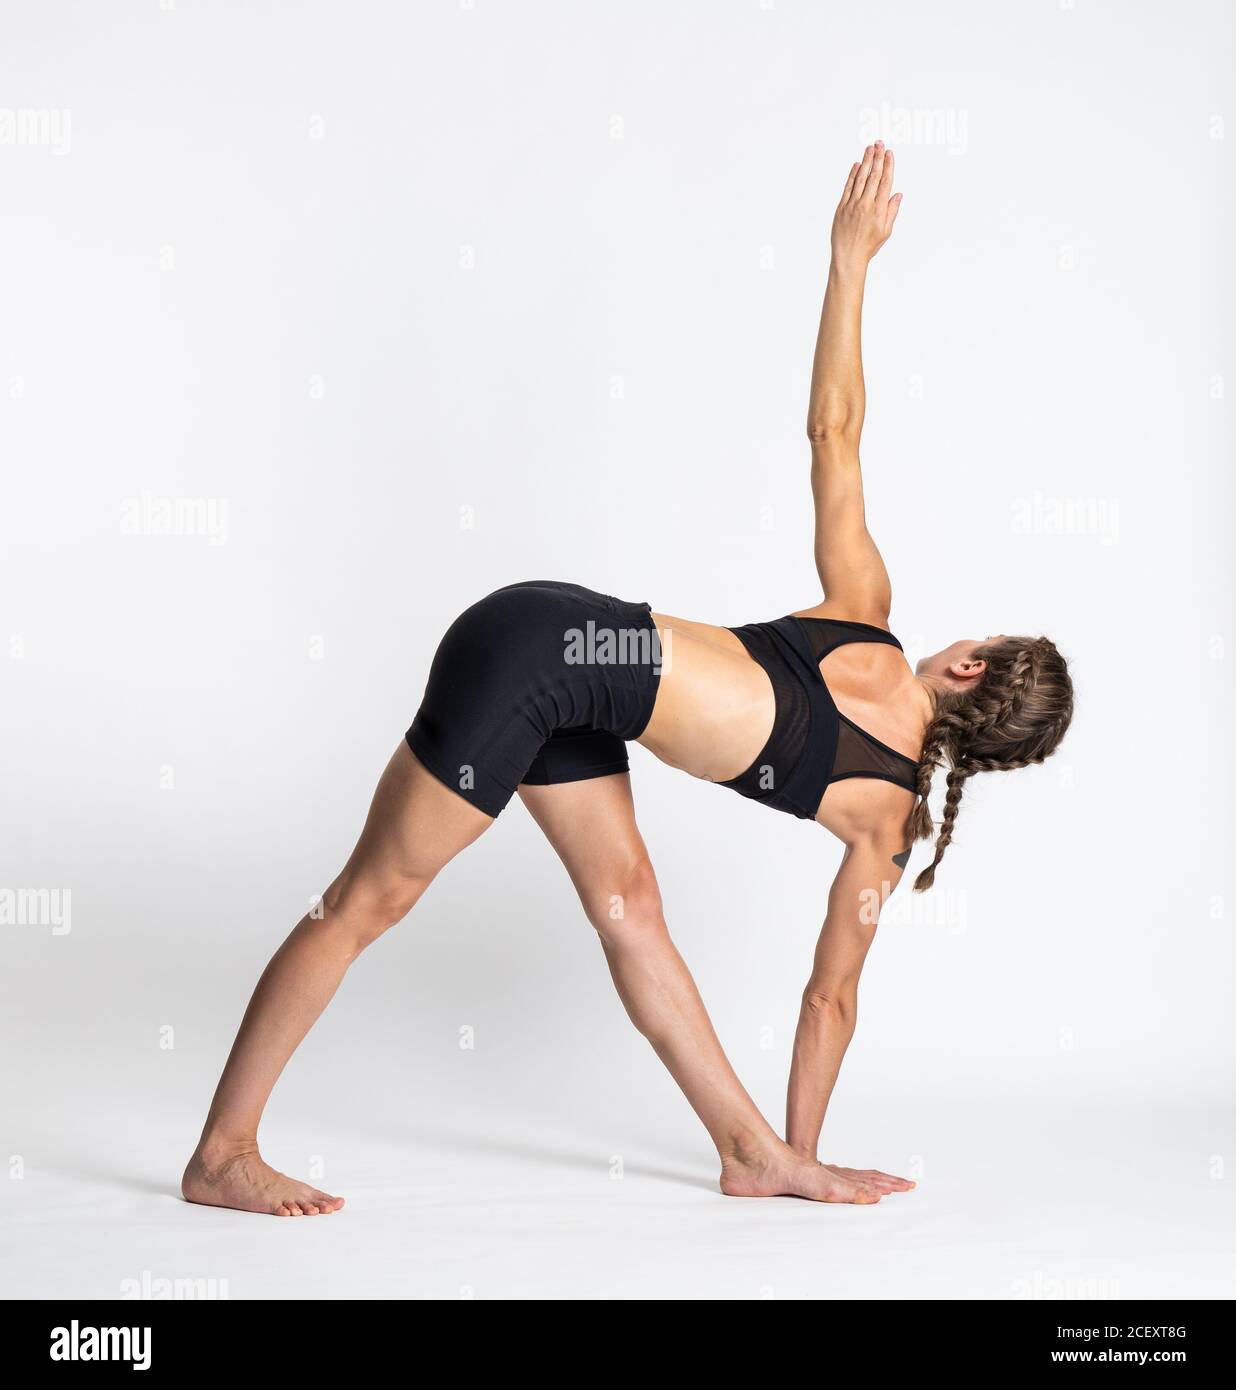 Full body side view of young barefoot female in sportswear performing Revolved Triangle yoga pose against white background Stock Photo